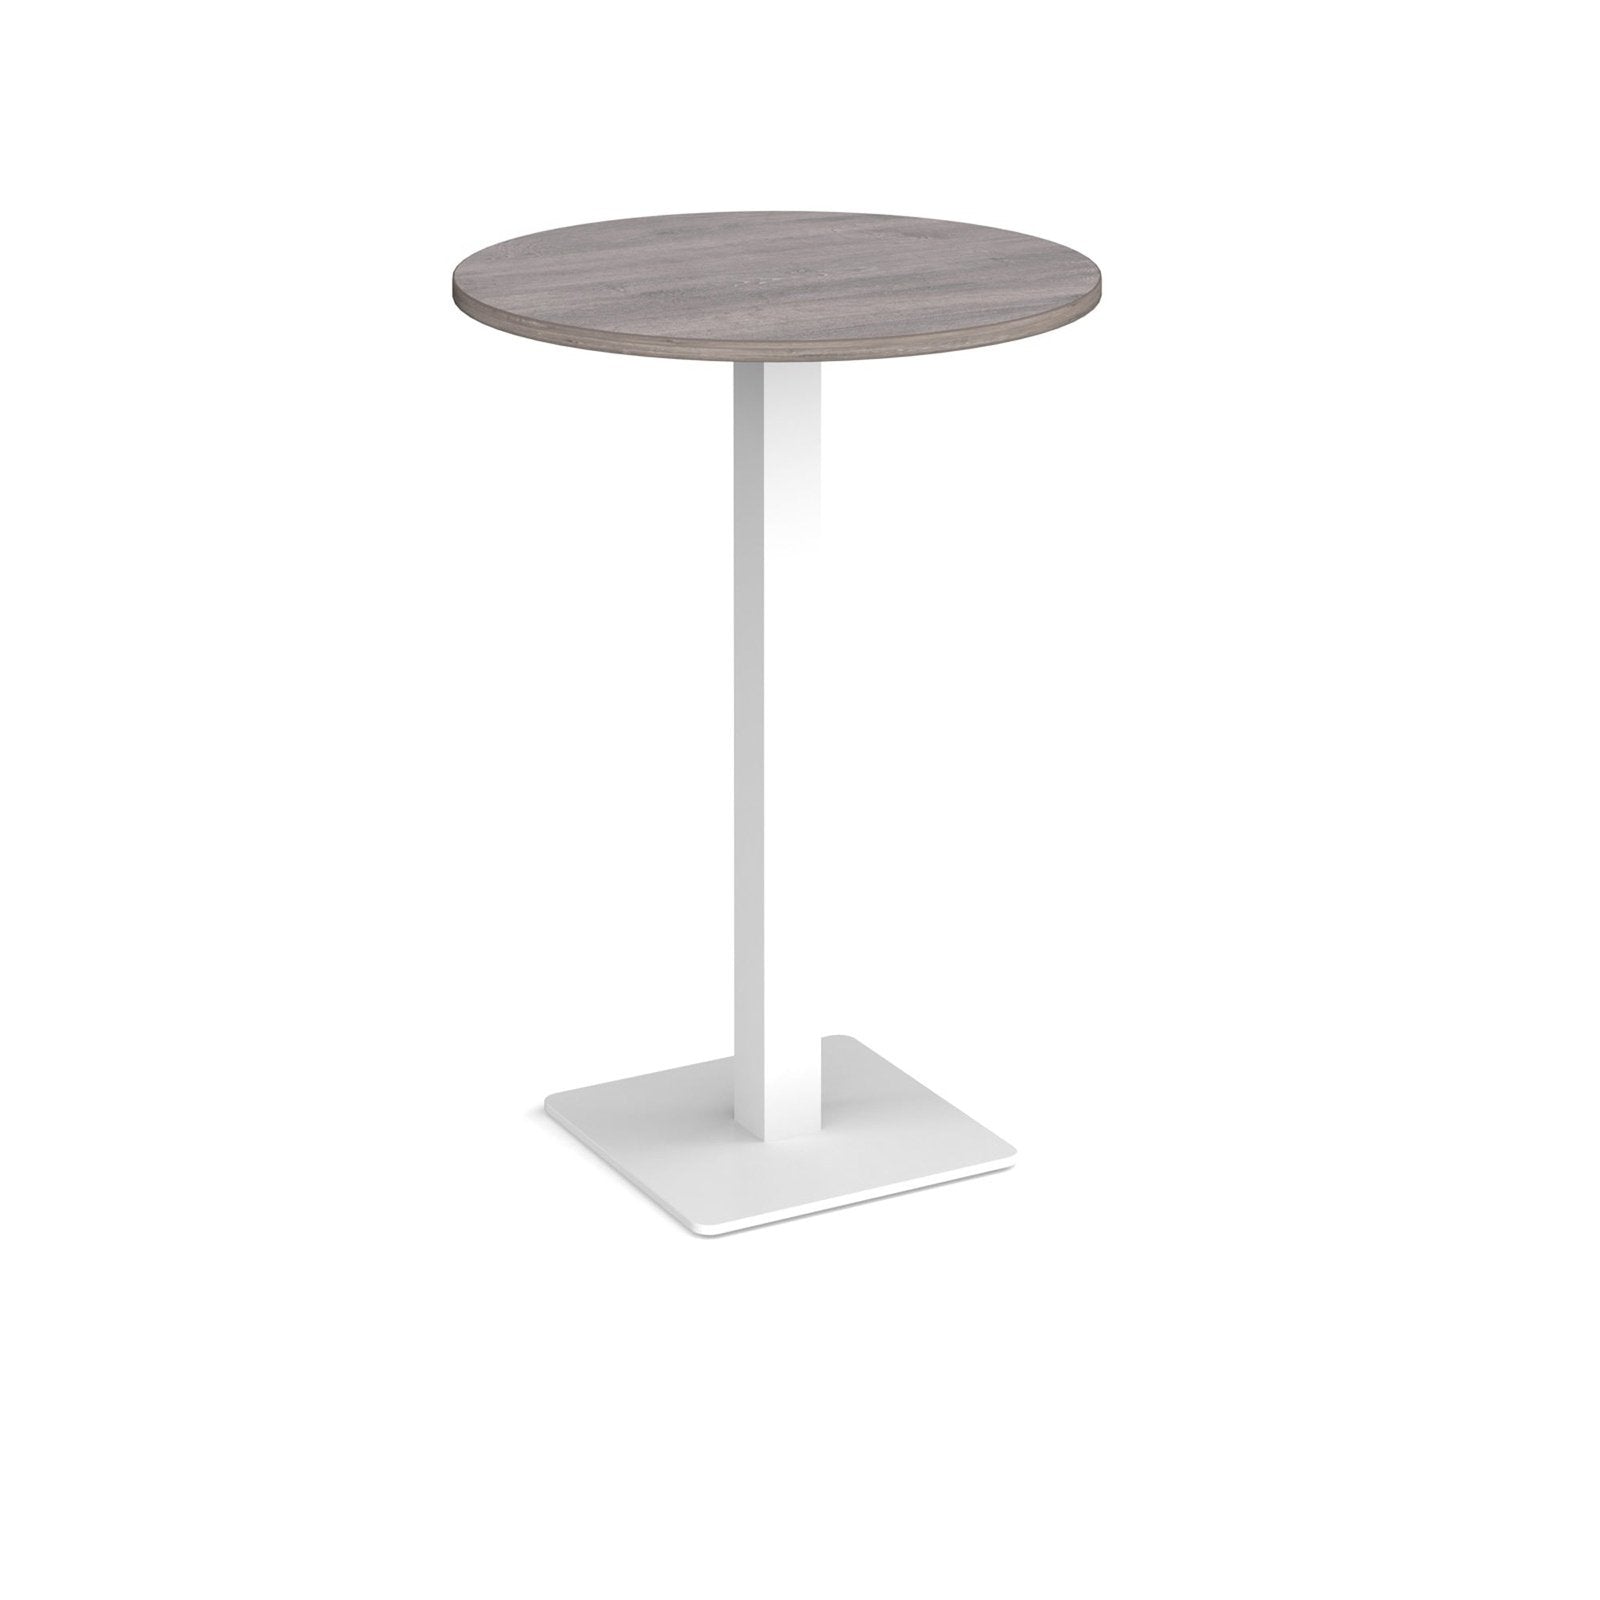 Brescia circular poseur table - Office Products Online